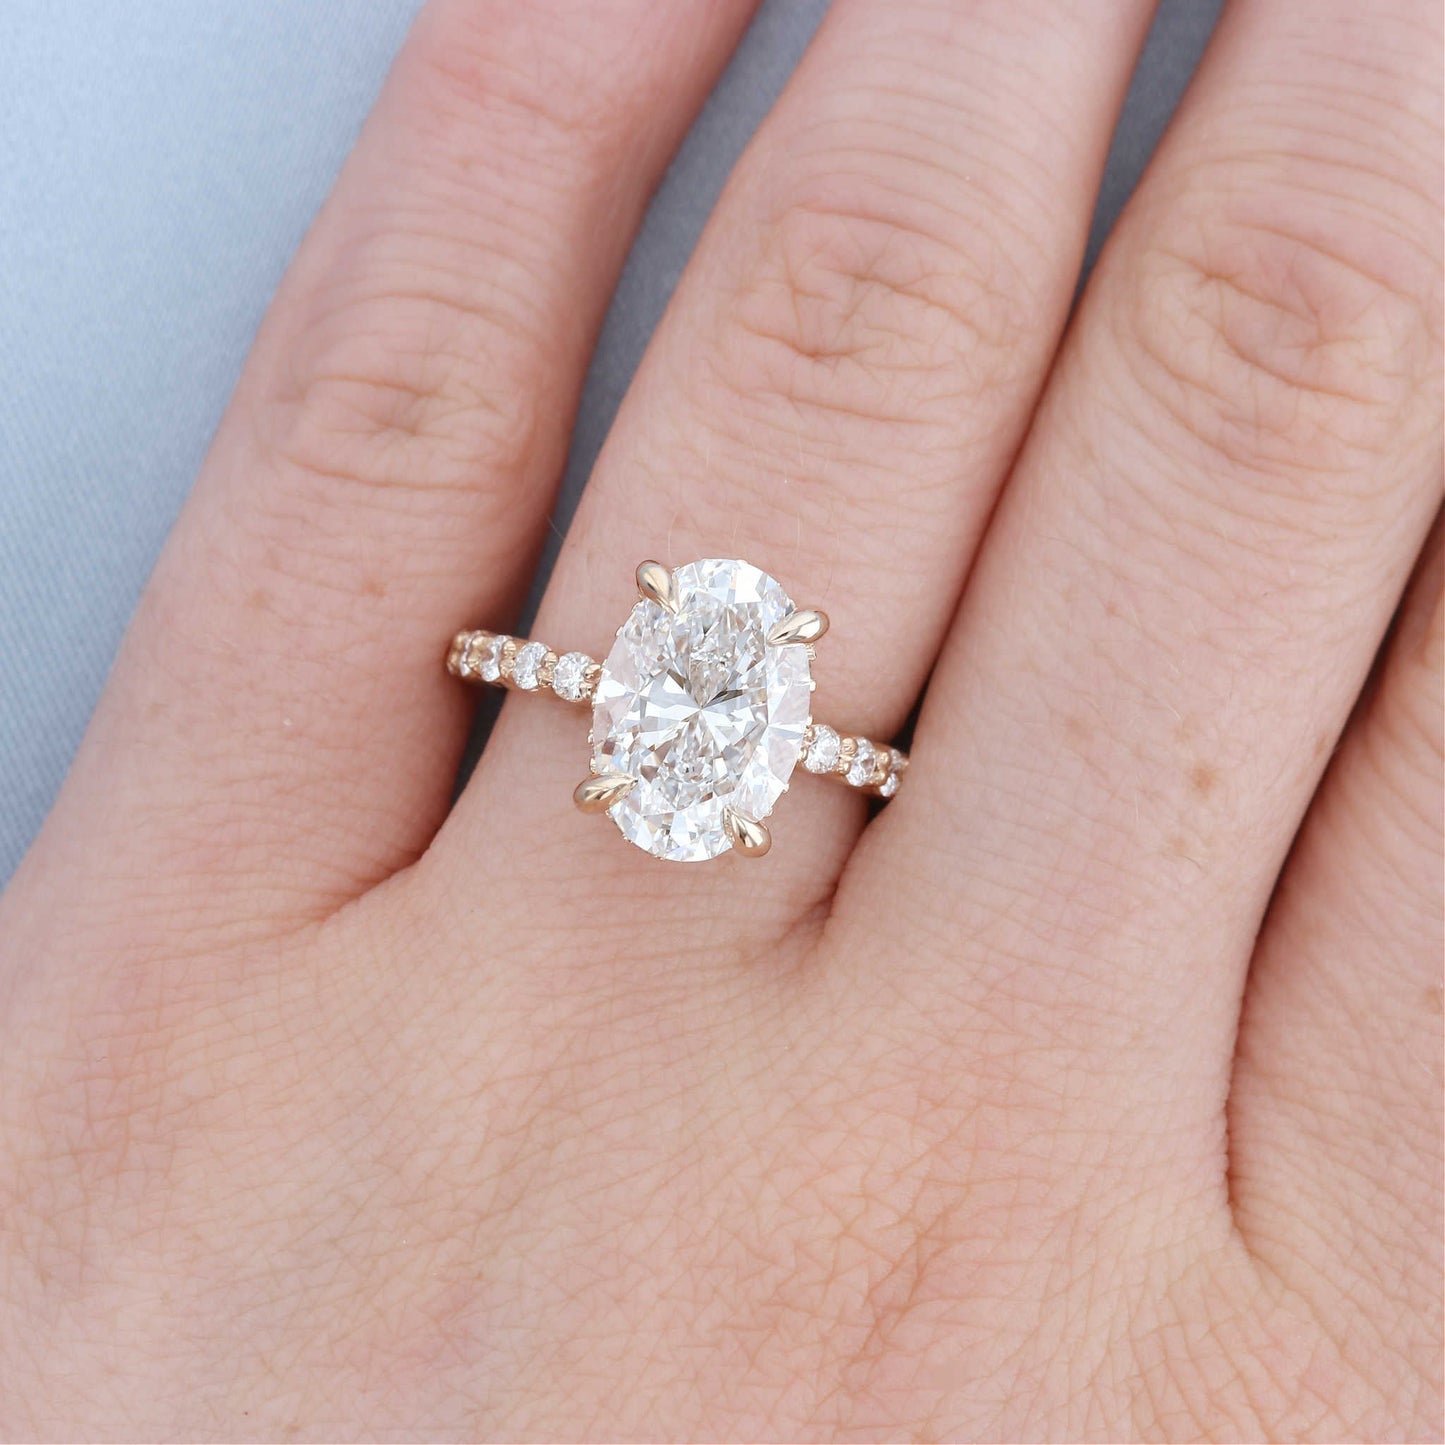 Hidden Halo Oval Diamond Engagement Ring on a Finger